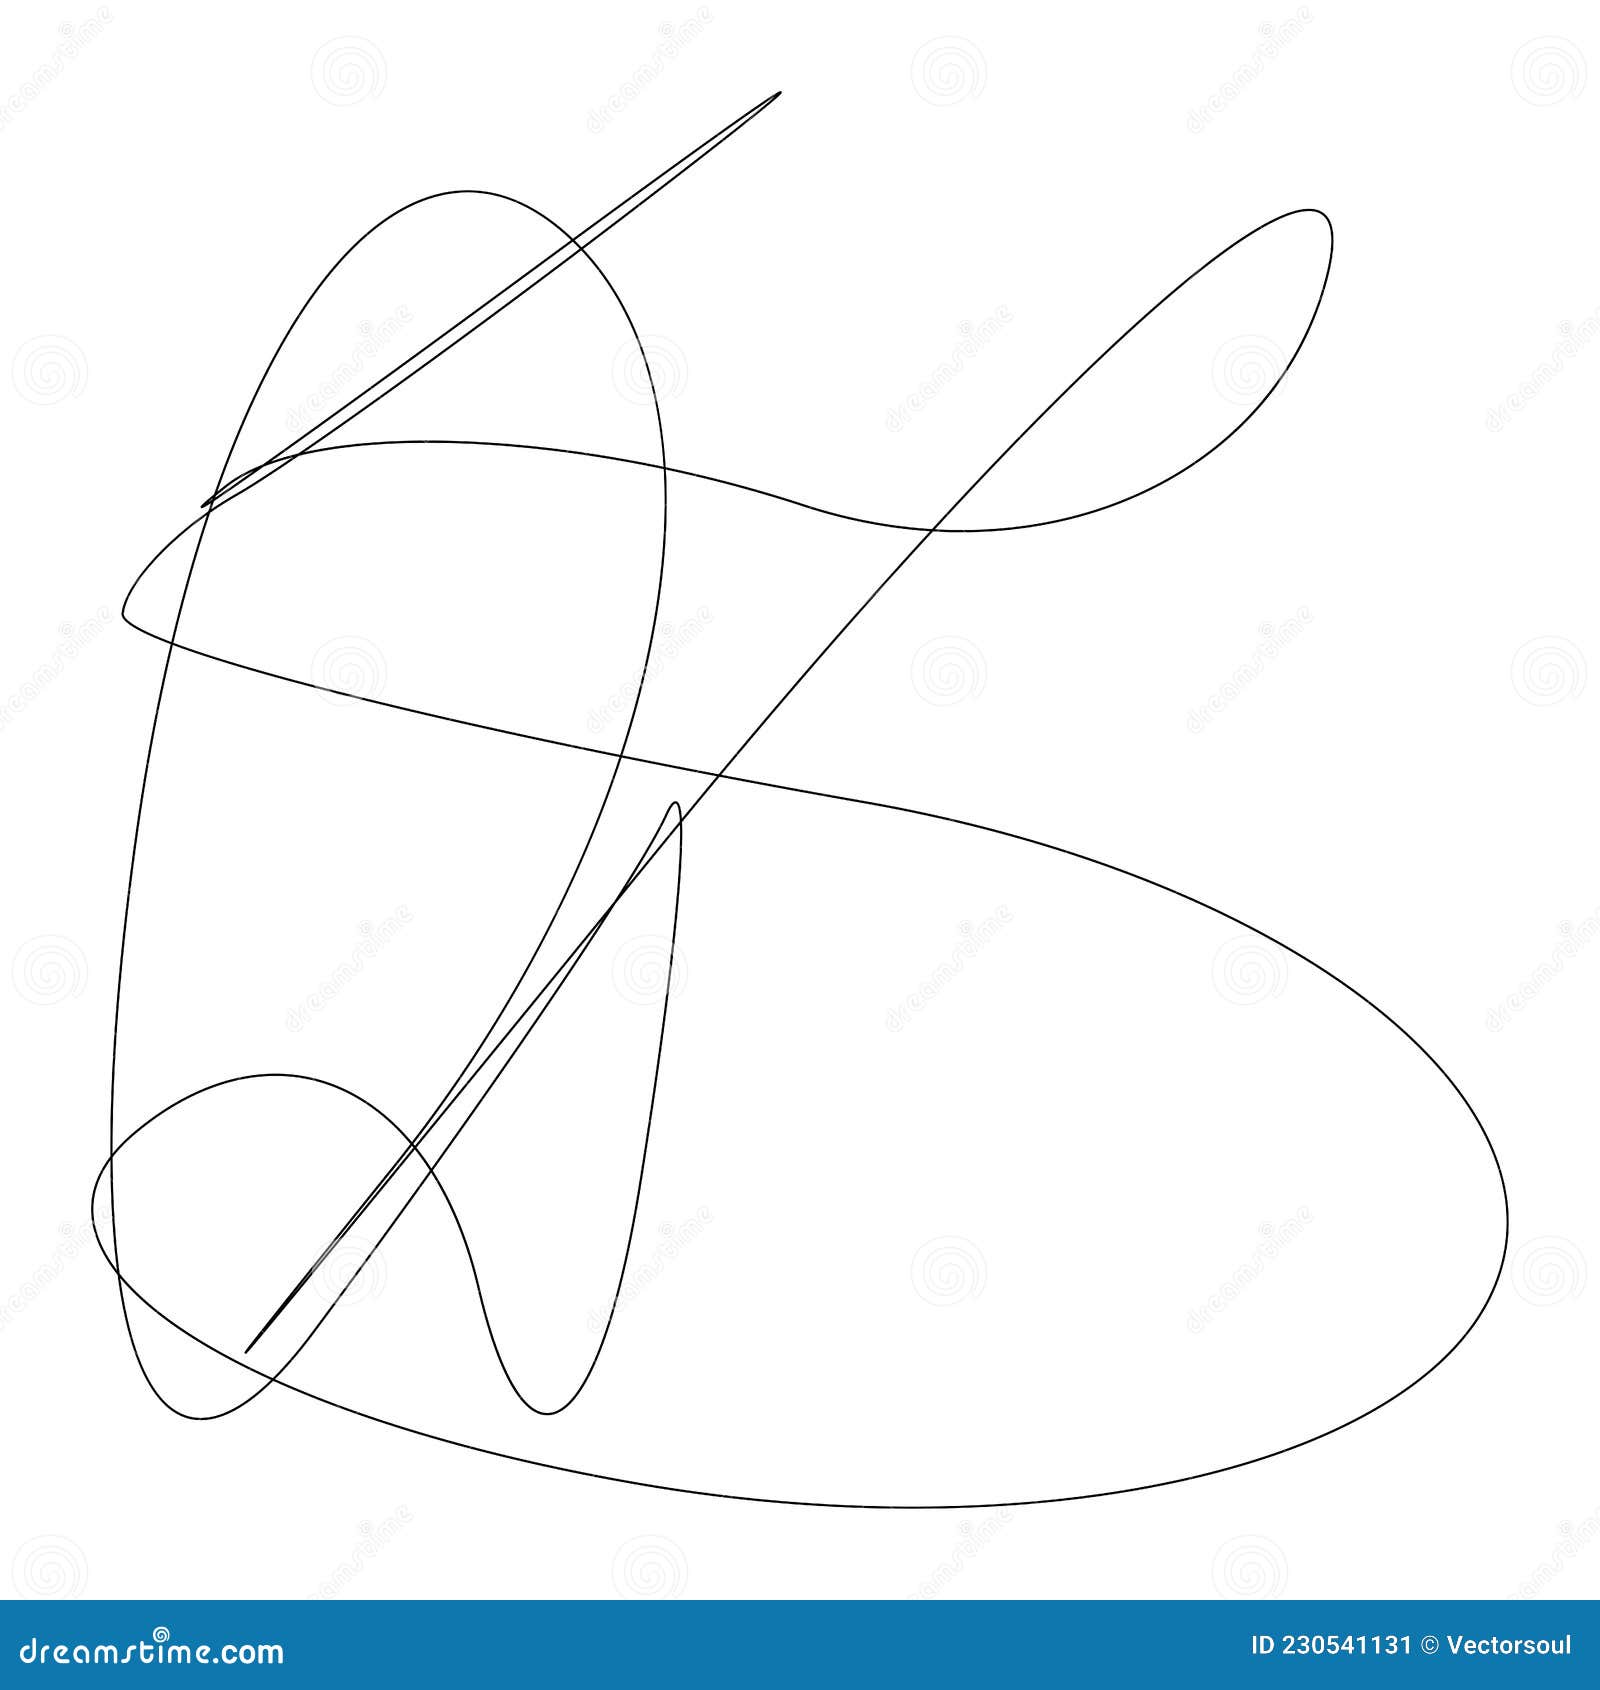 random curvy, squiggle, freehand abstract . squiggle, wriggle distortion, deformation effect 